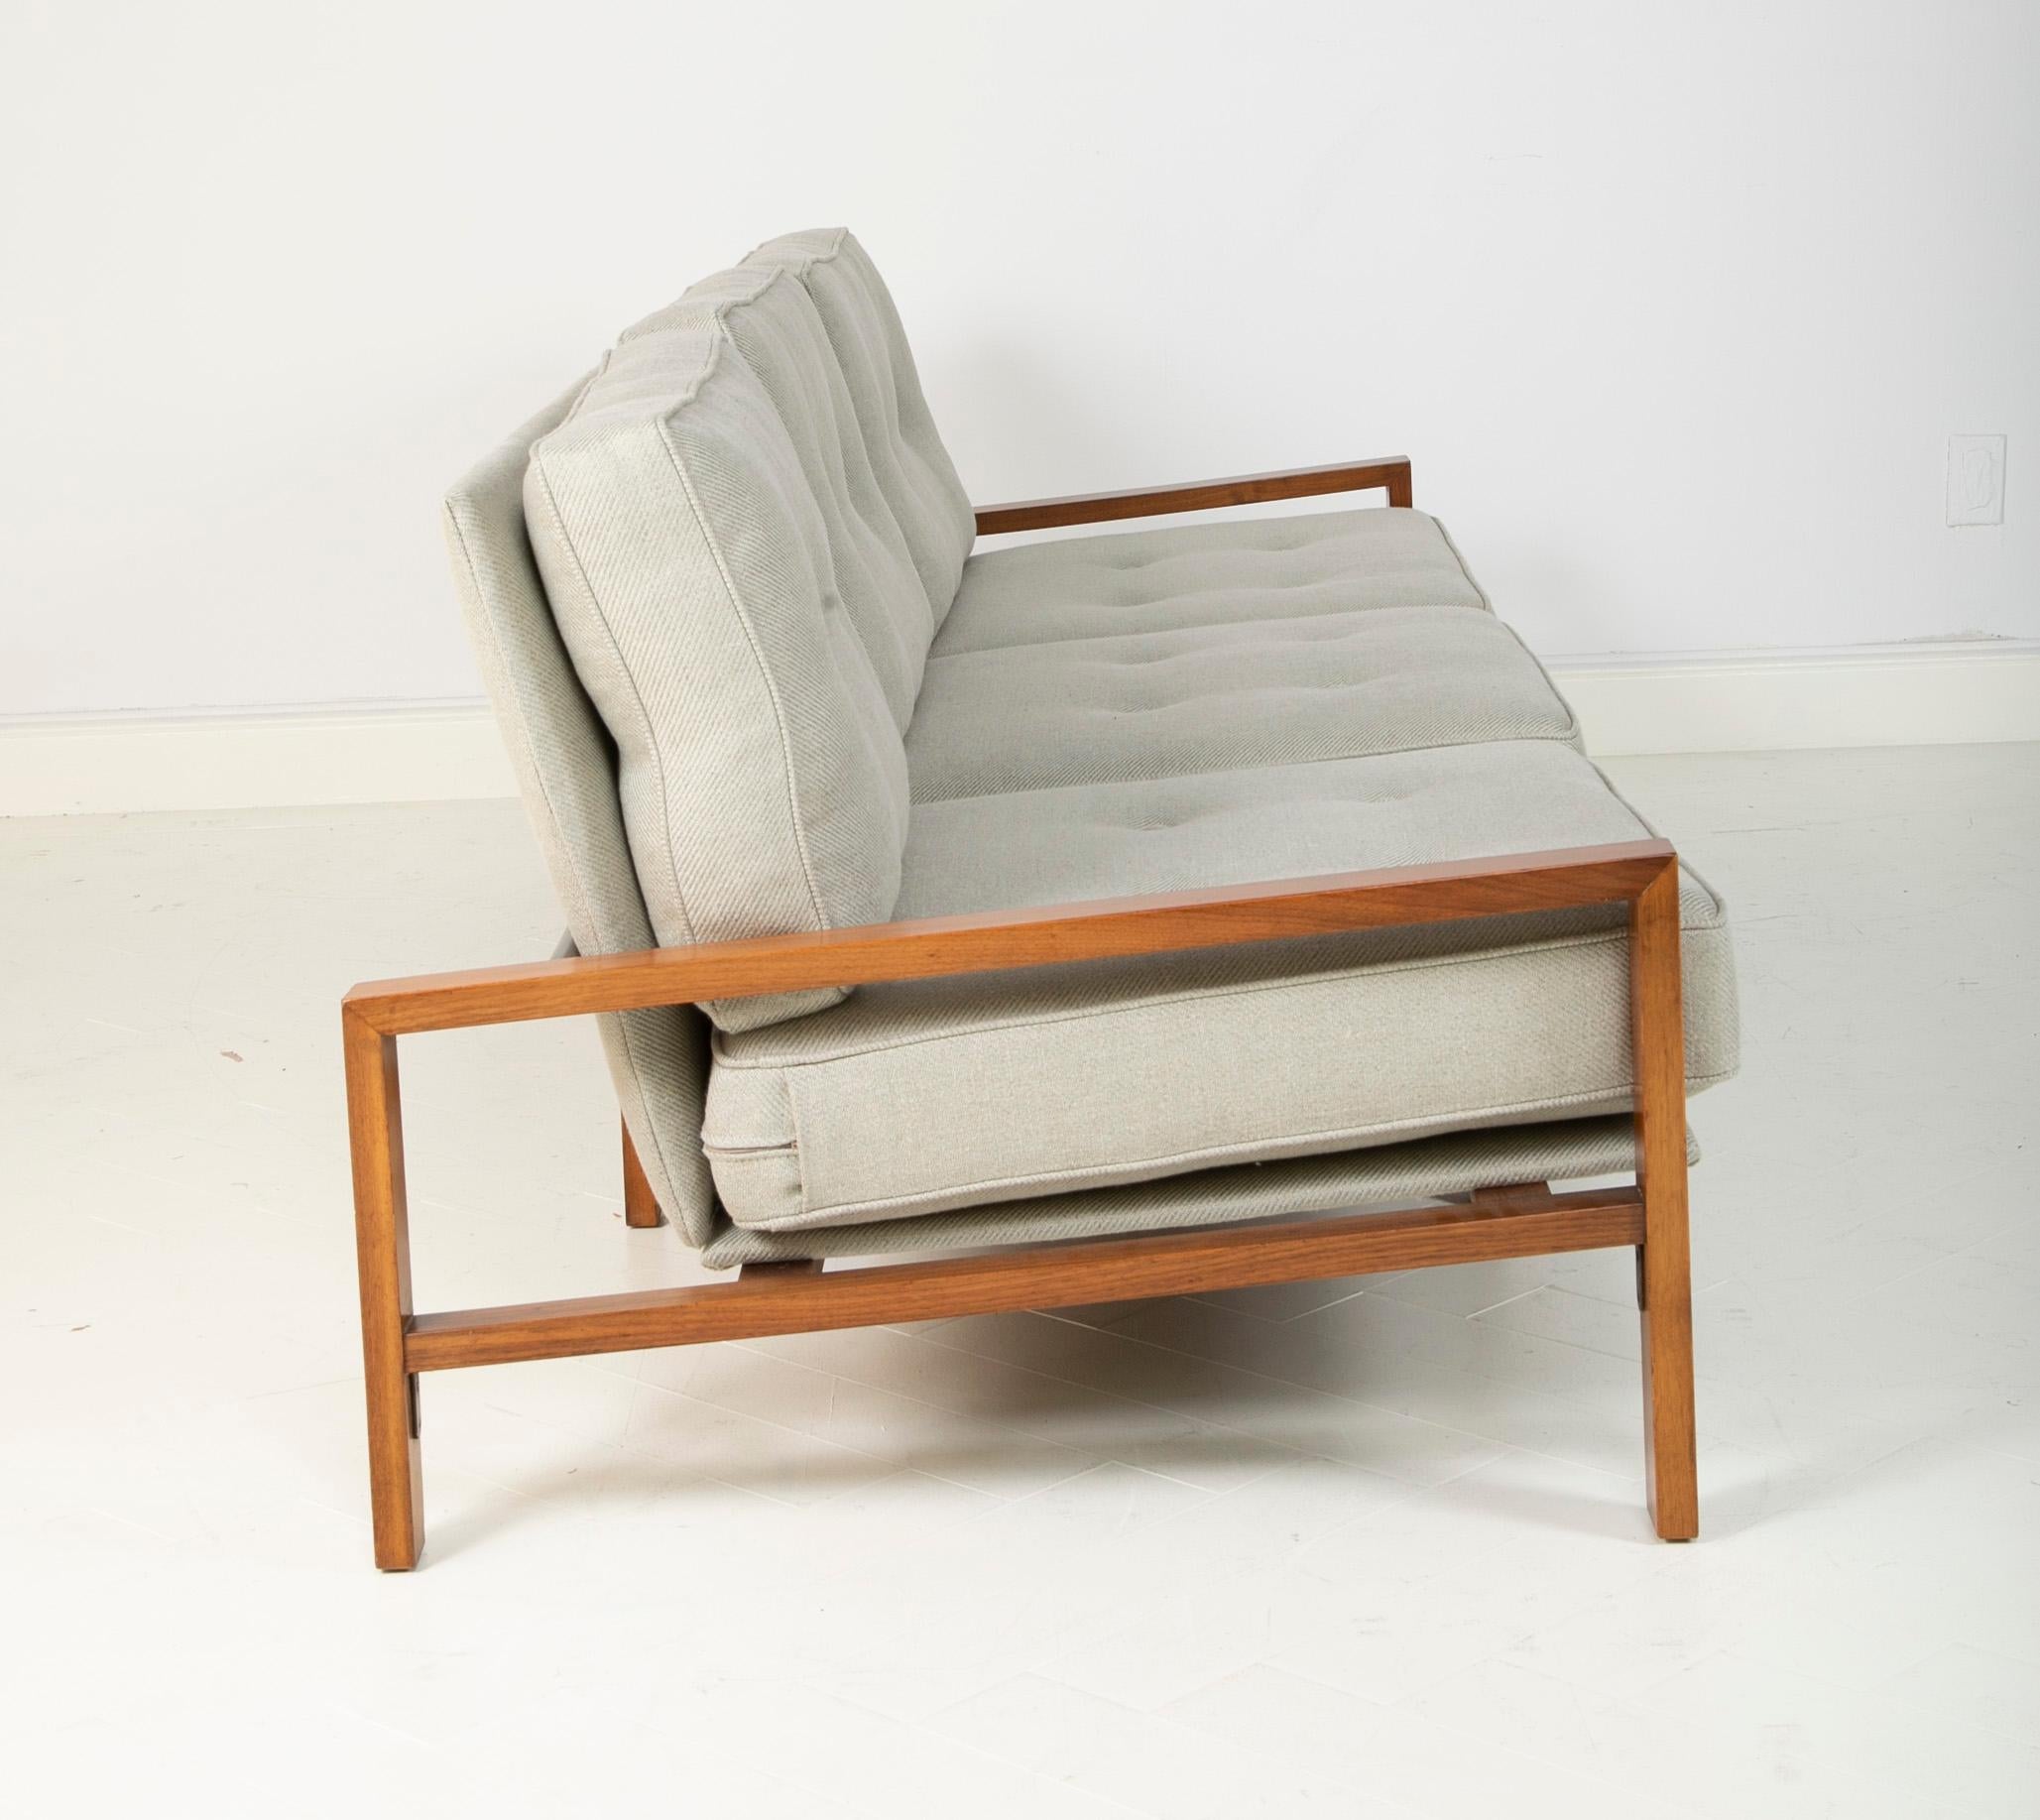 Mid-20th Century Van Keppel & Green Prototype Sofa Owned by The Founders of Architectural Pottery